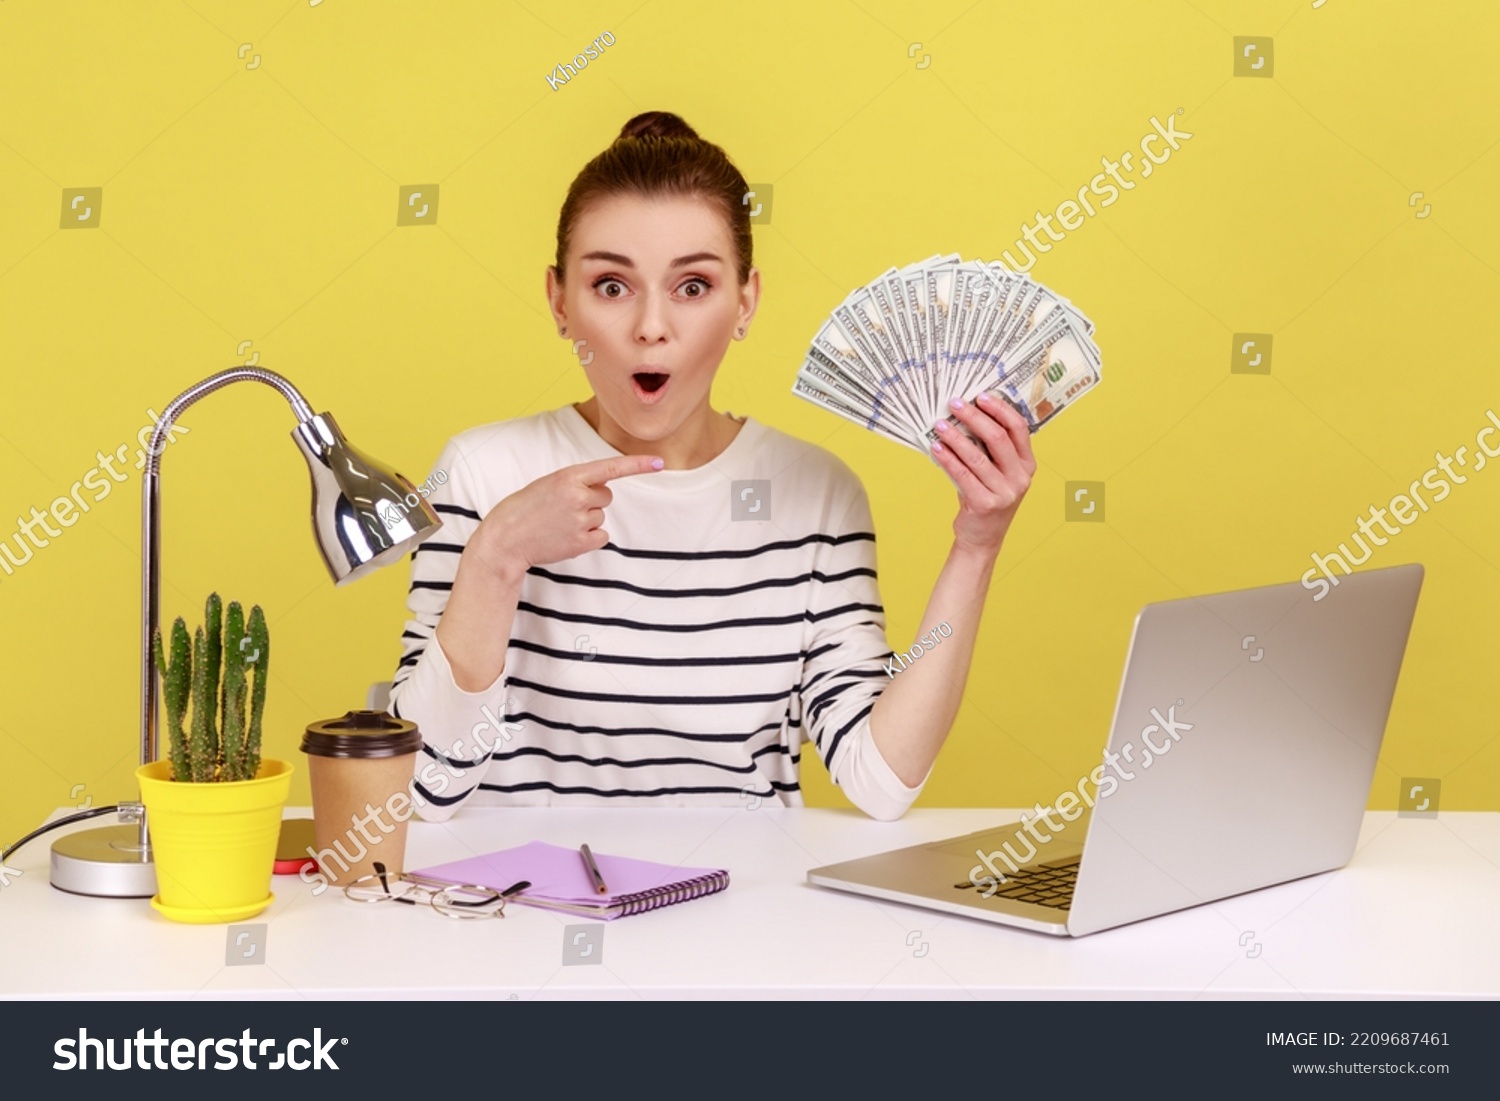 Amazed shocked woman pointing finger at hundred dollar bills, holding sitting at workplace with laptop, high salary, bonuses and perks. Indoor studio studio shot isolated on yellow background. #2209687461